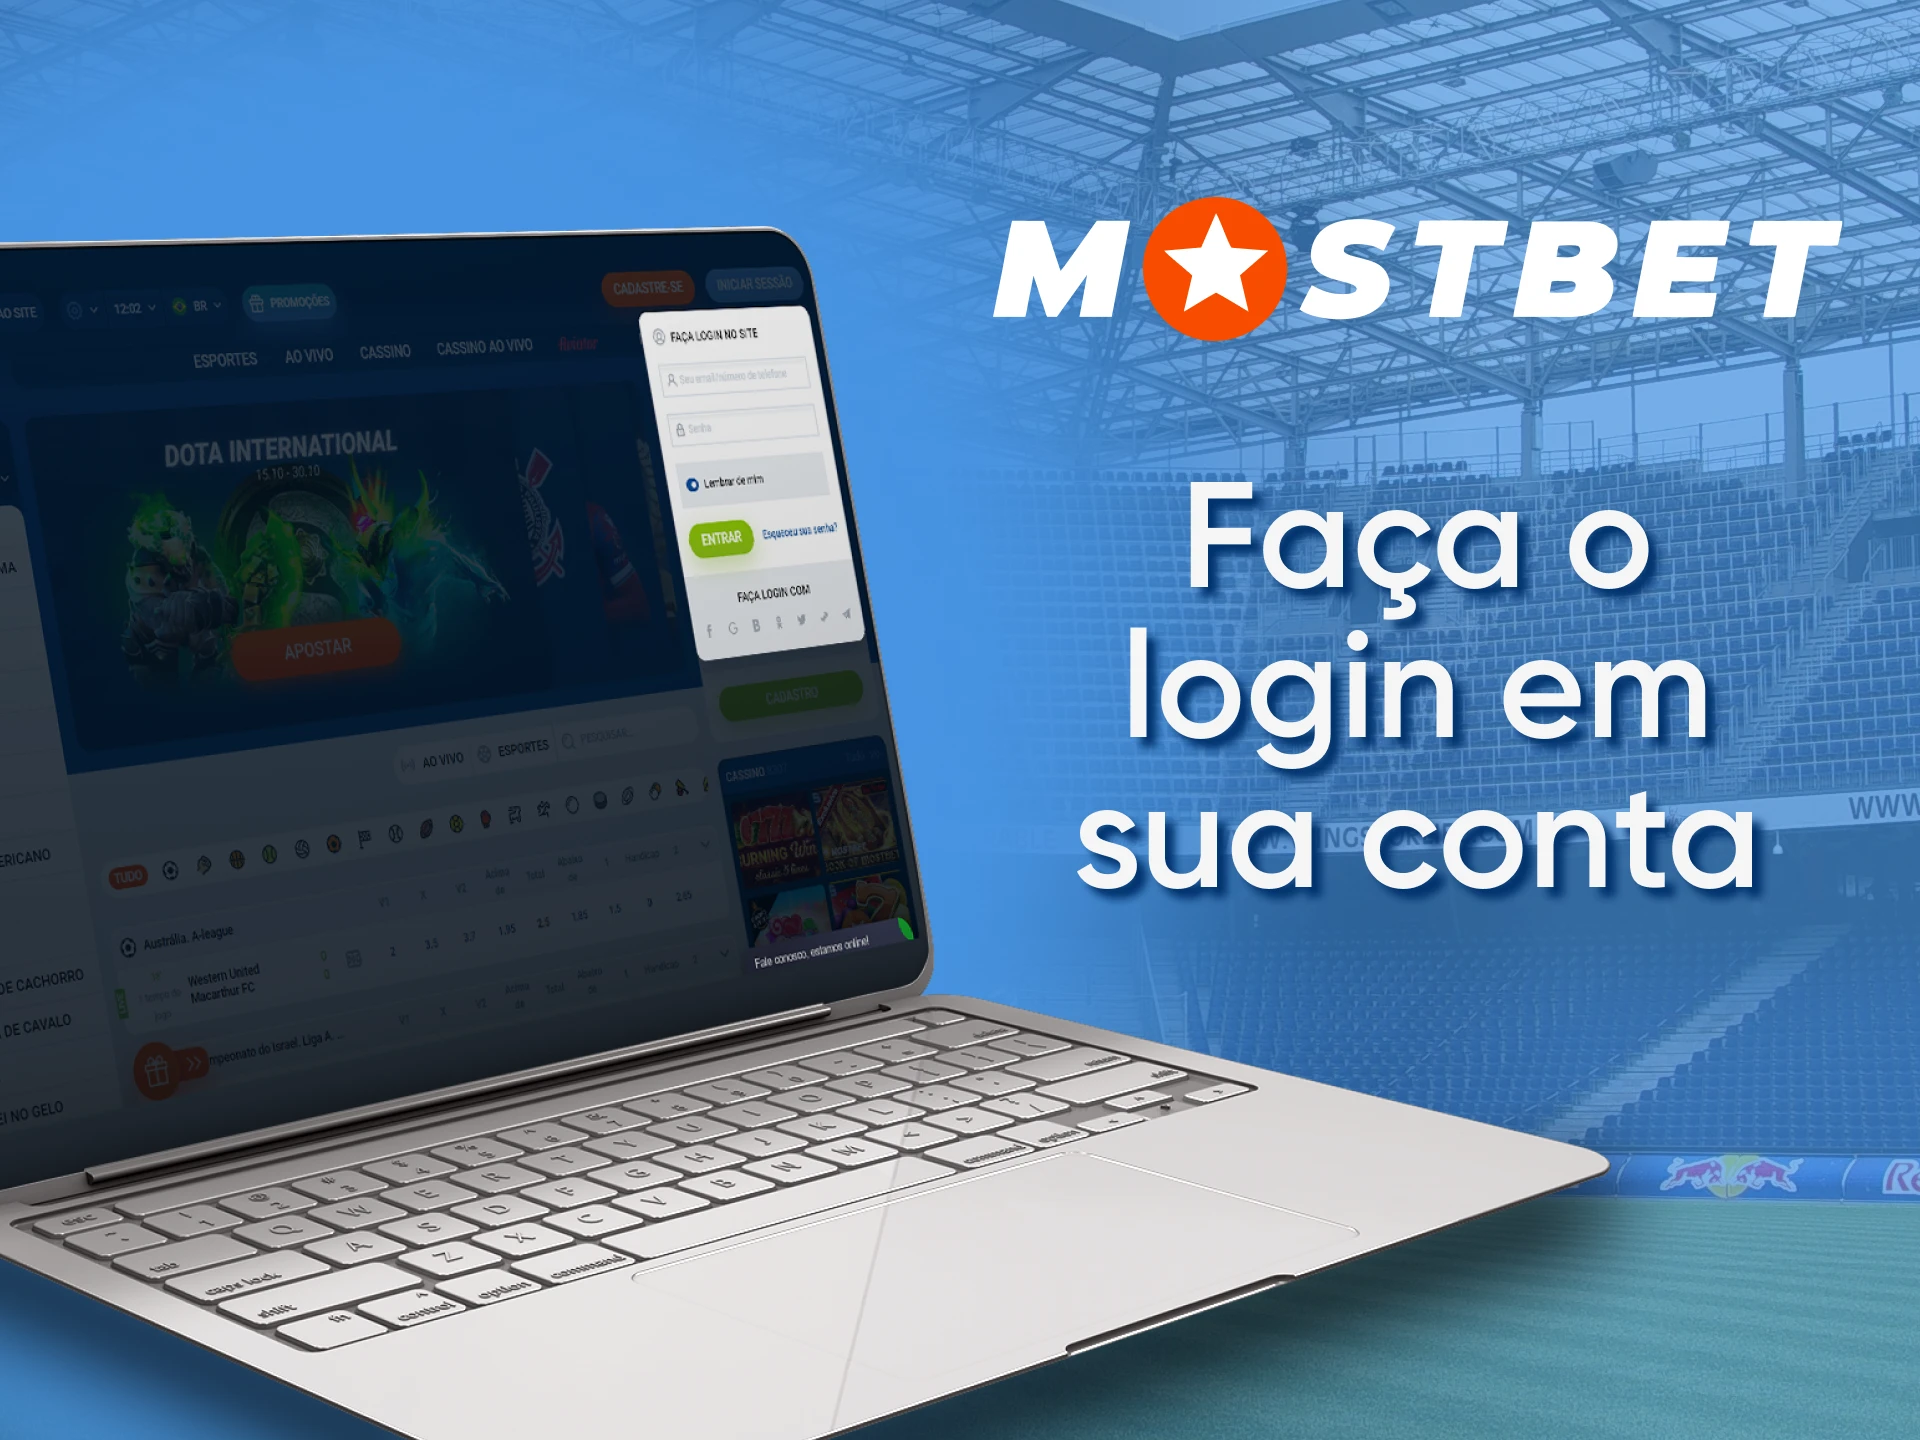 Access your Mostbet account.